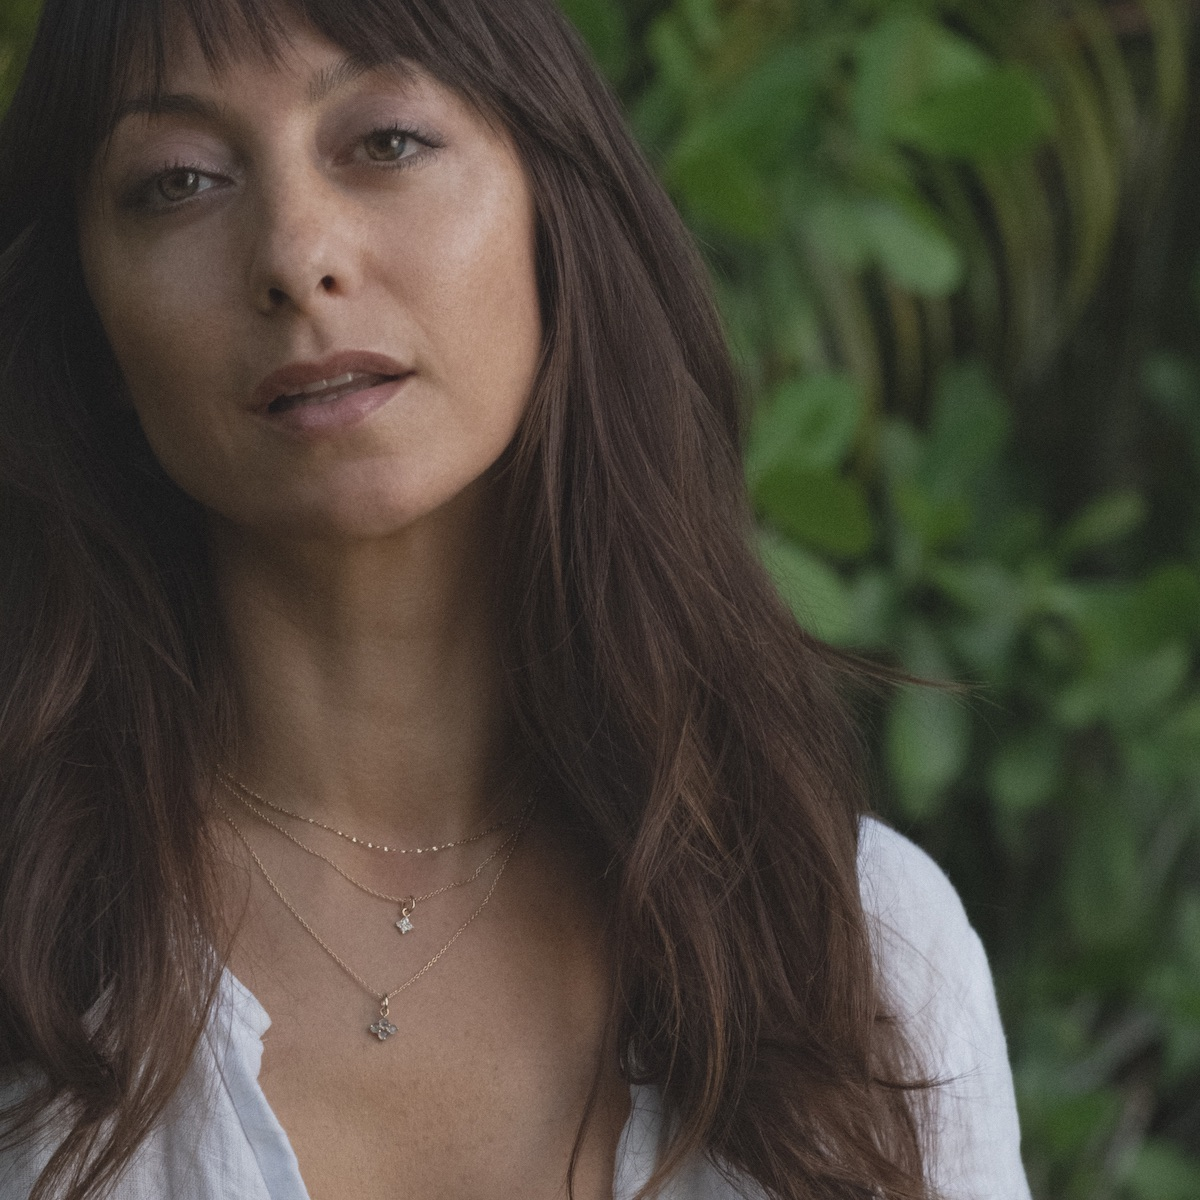 Model in white shirt in front of foliage wearing delicate yellow gold chains and small pendant charms in white sapphire and labradorite.